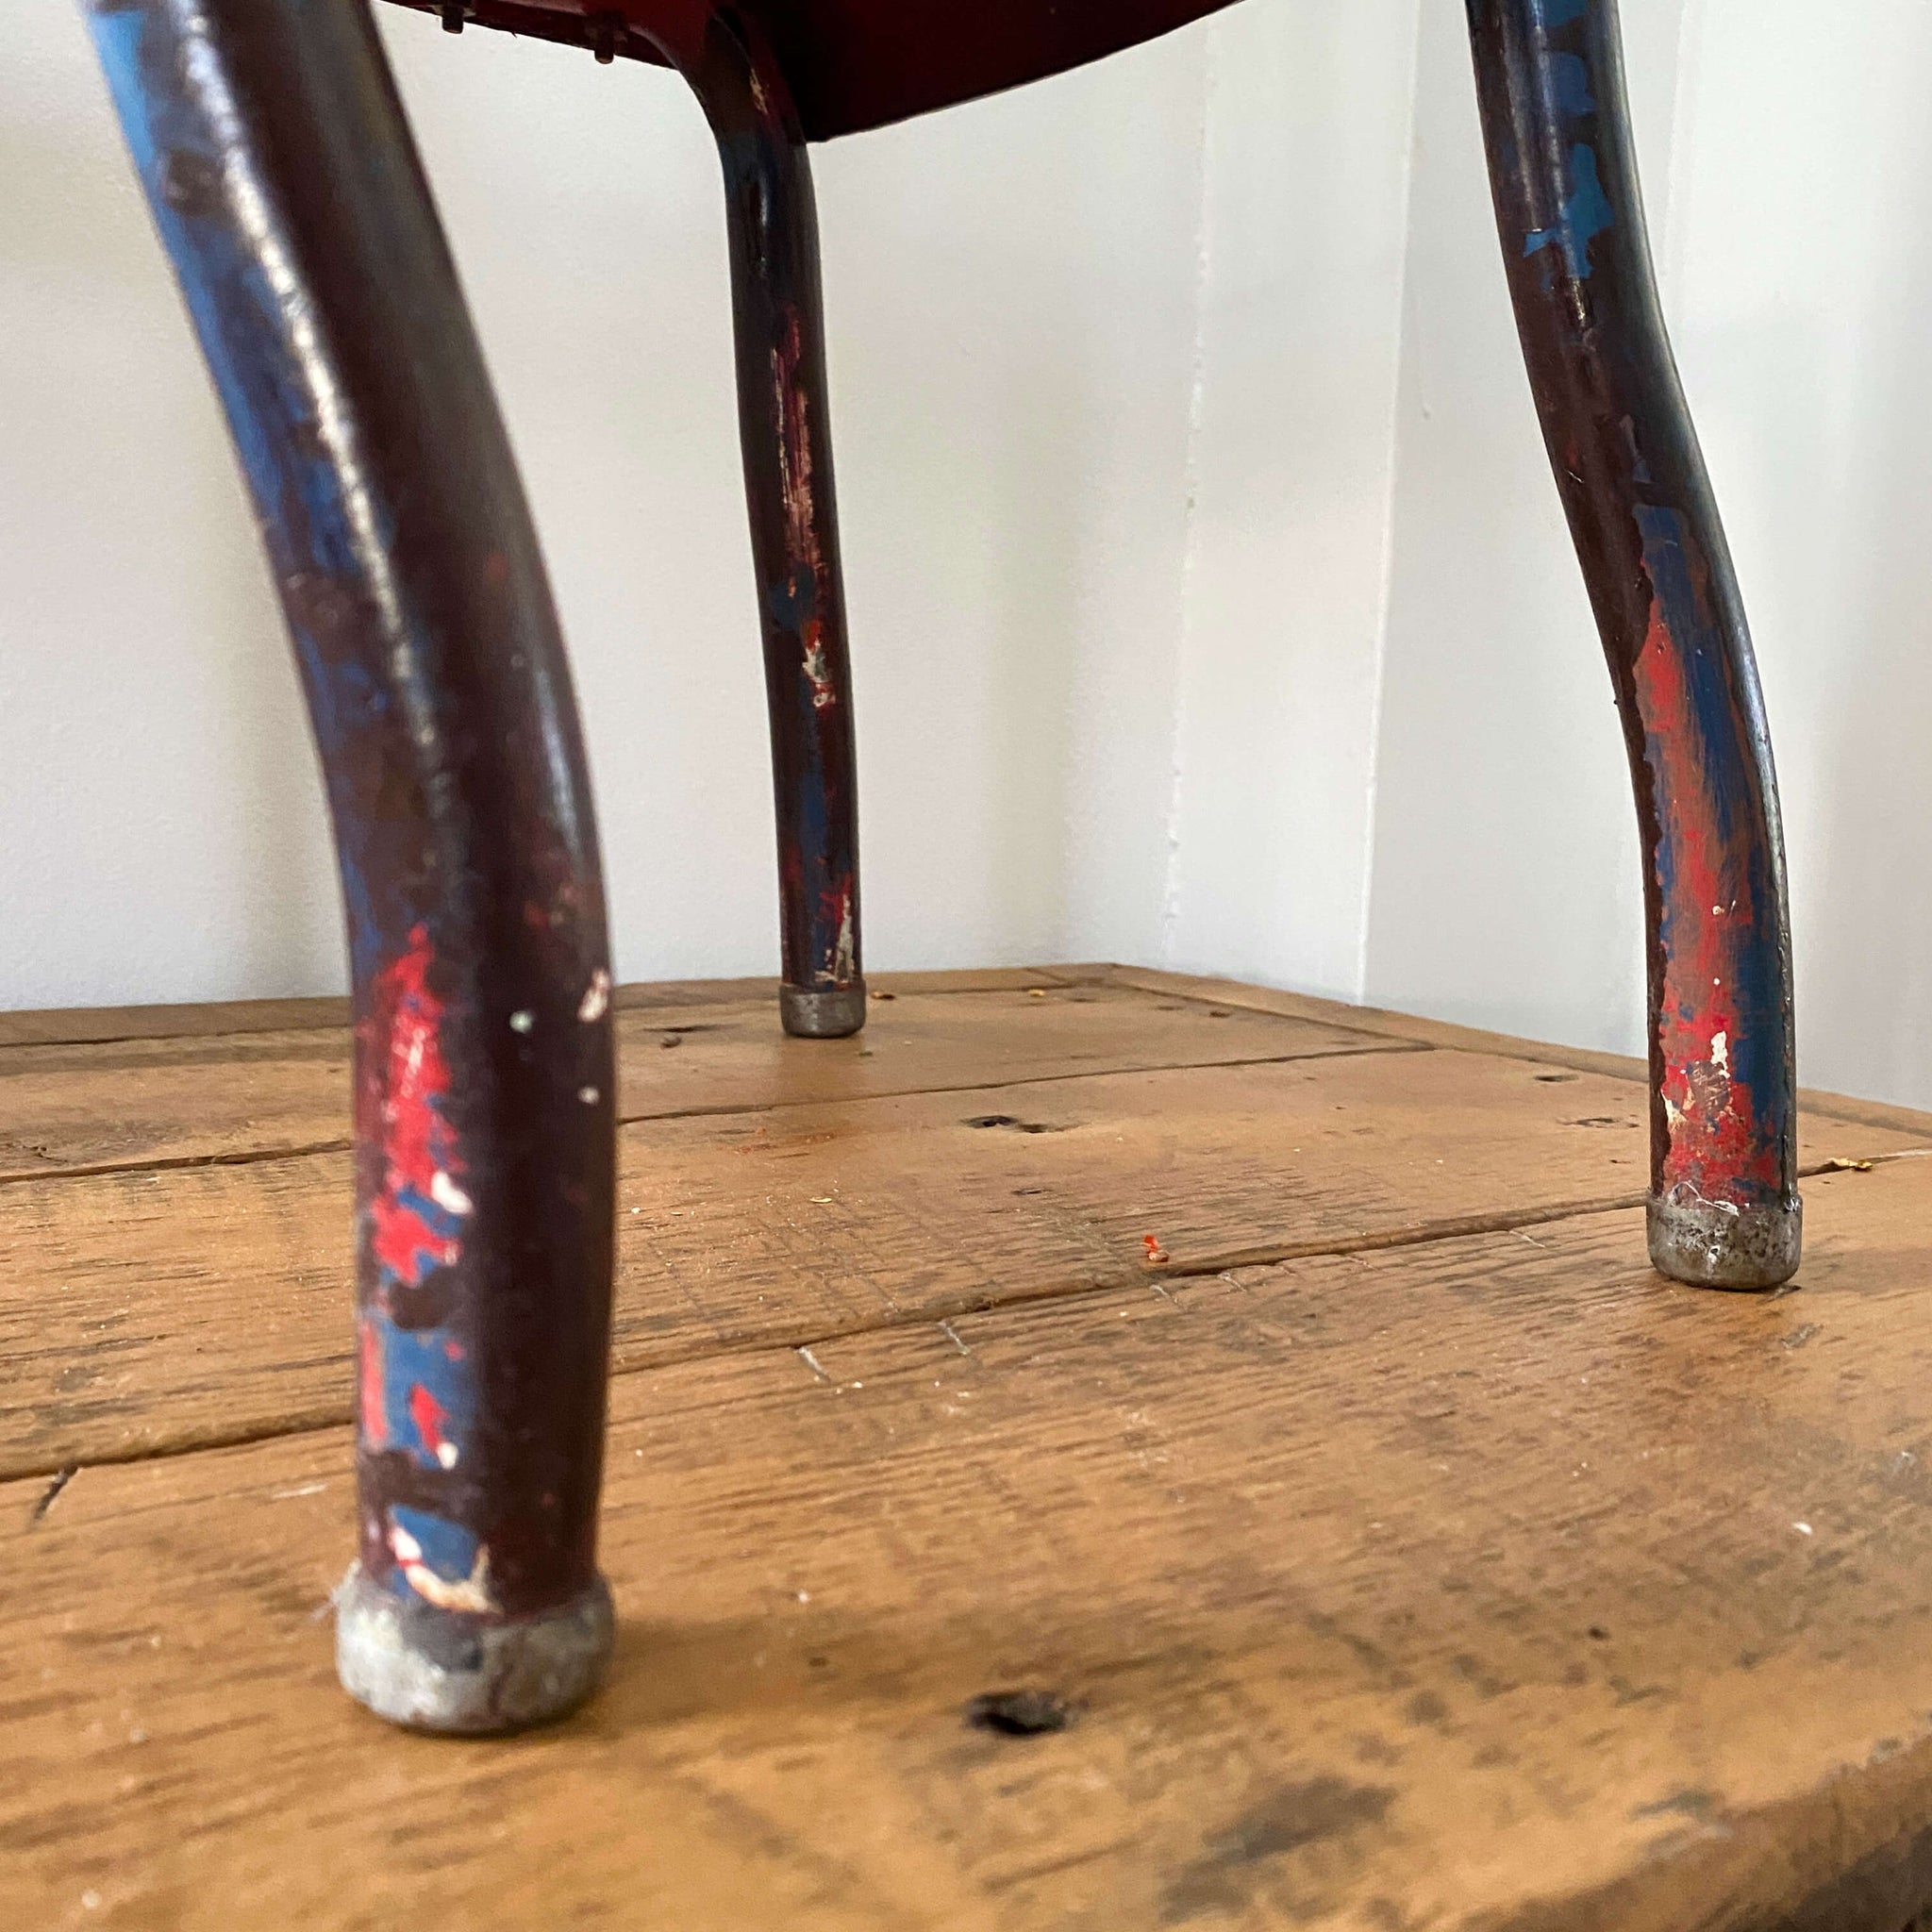 Vintage Metal Step Stool Chair by Cosco - 4 D Model circa 1940s-1950s